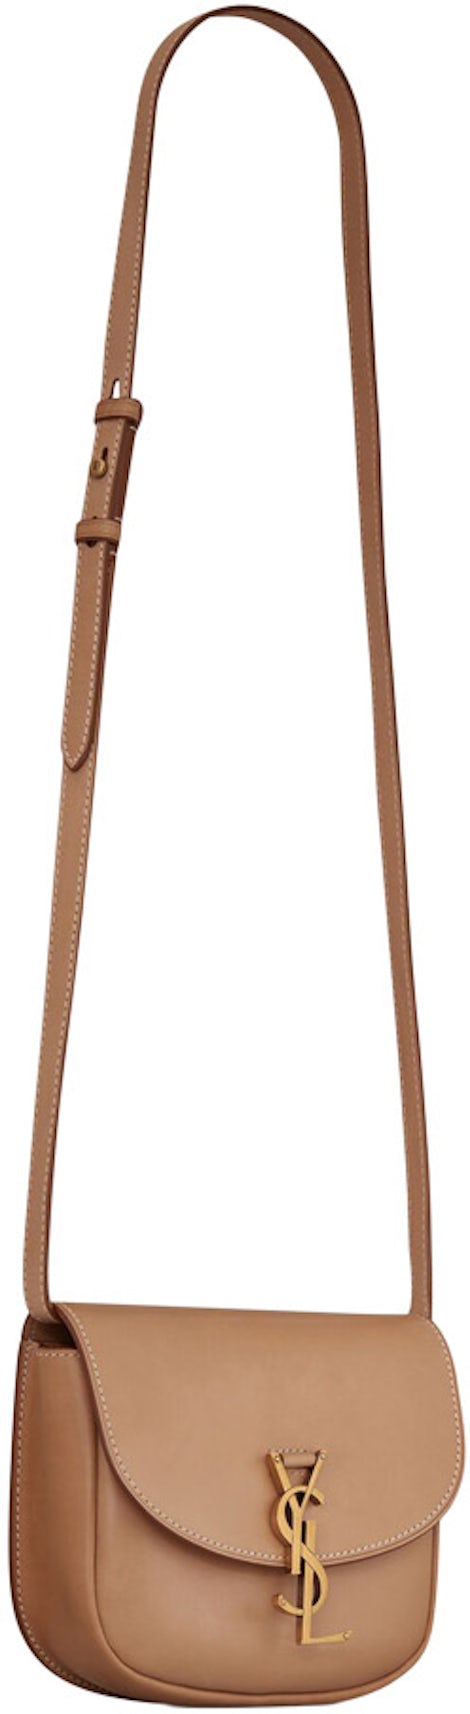 LE MONOGRAMME CAMERA BAG IN CASSANDRE CANVAS AND SMOOTH LEATHER, Saint  Laurent